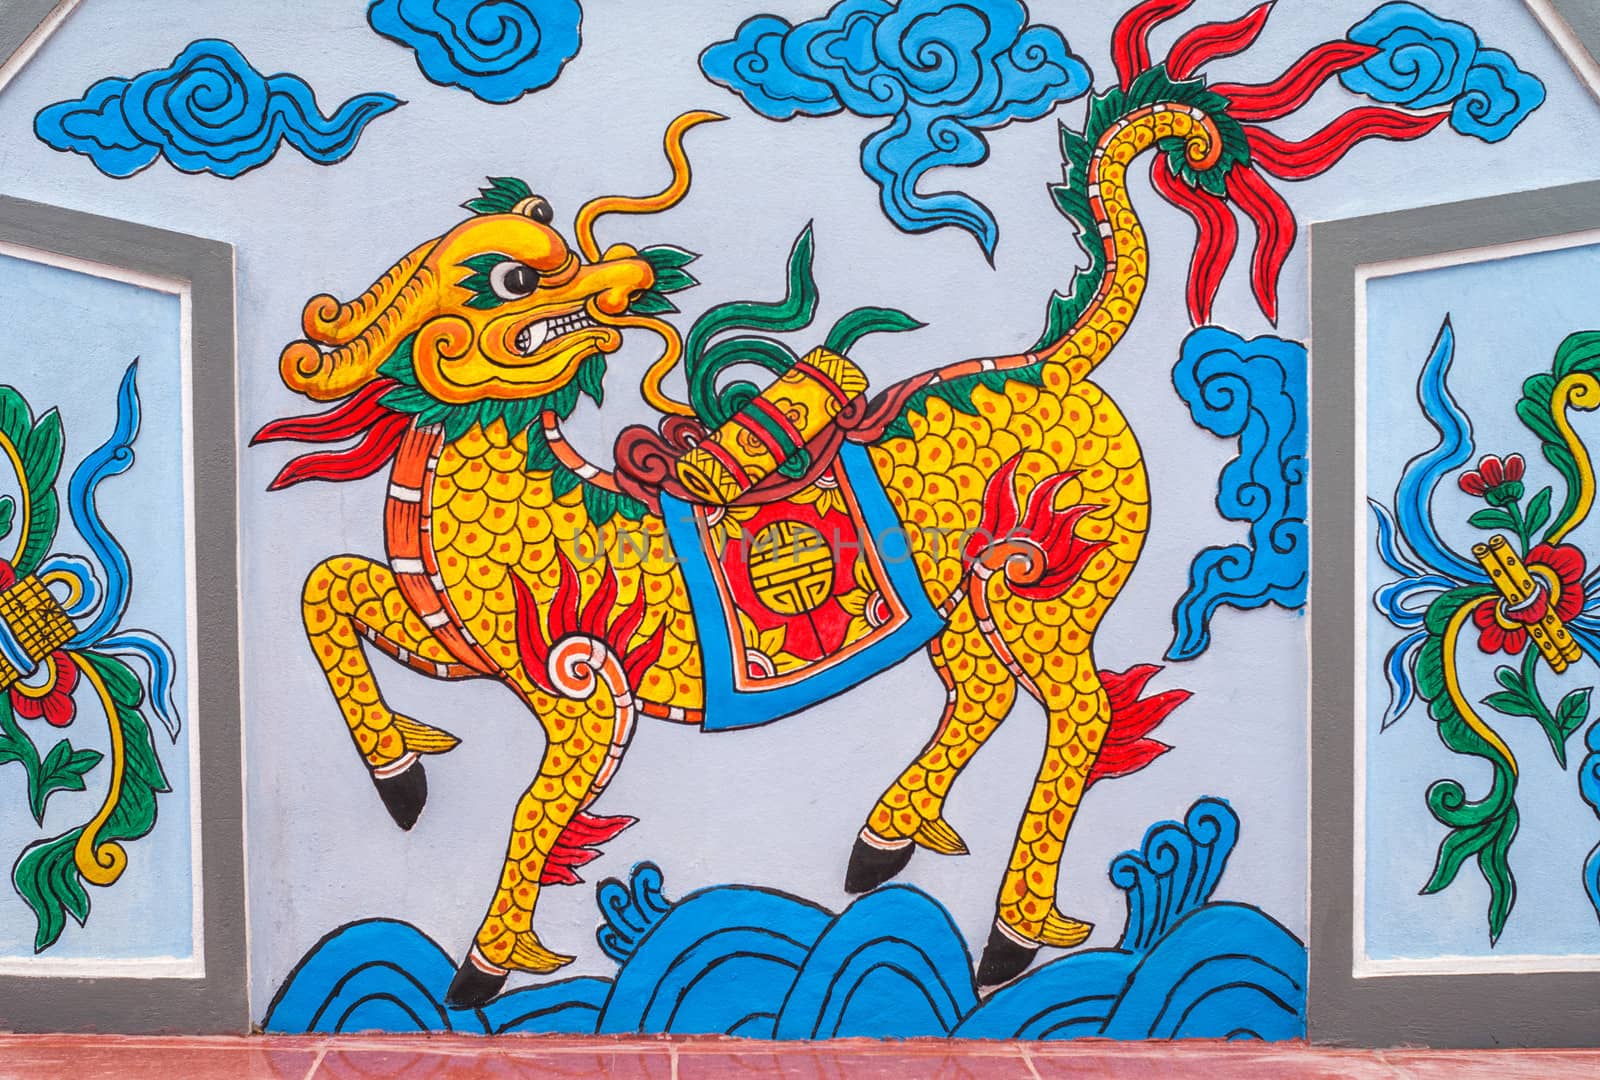 Vietnam Quang Binh Province: Chinese dragon painting at cemetery. by Claudine